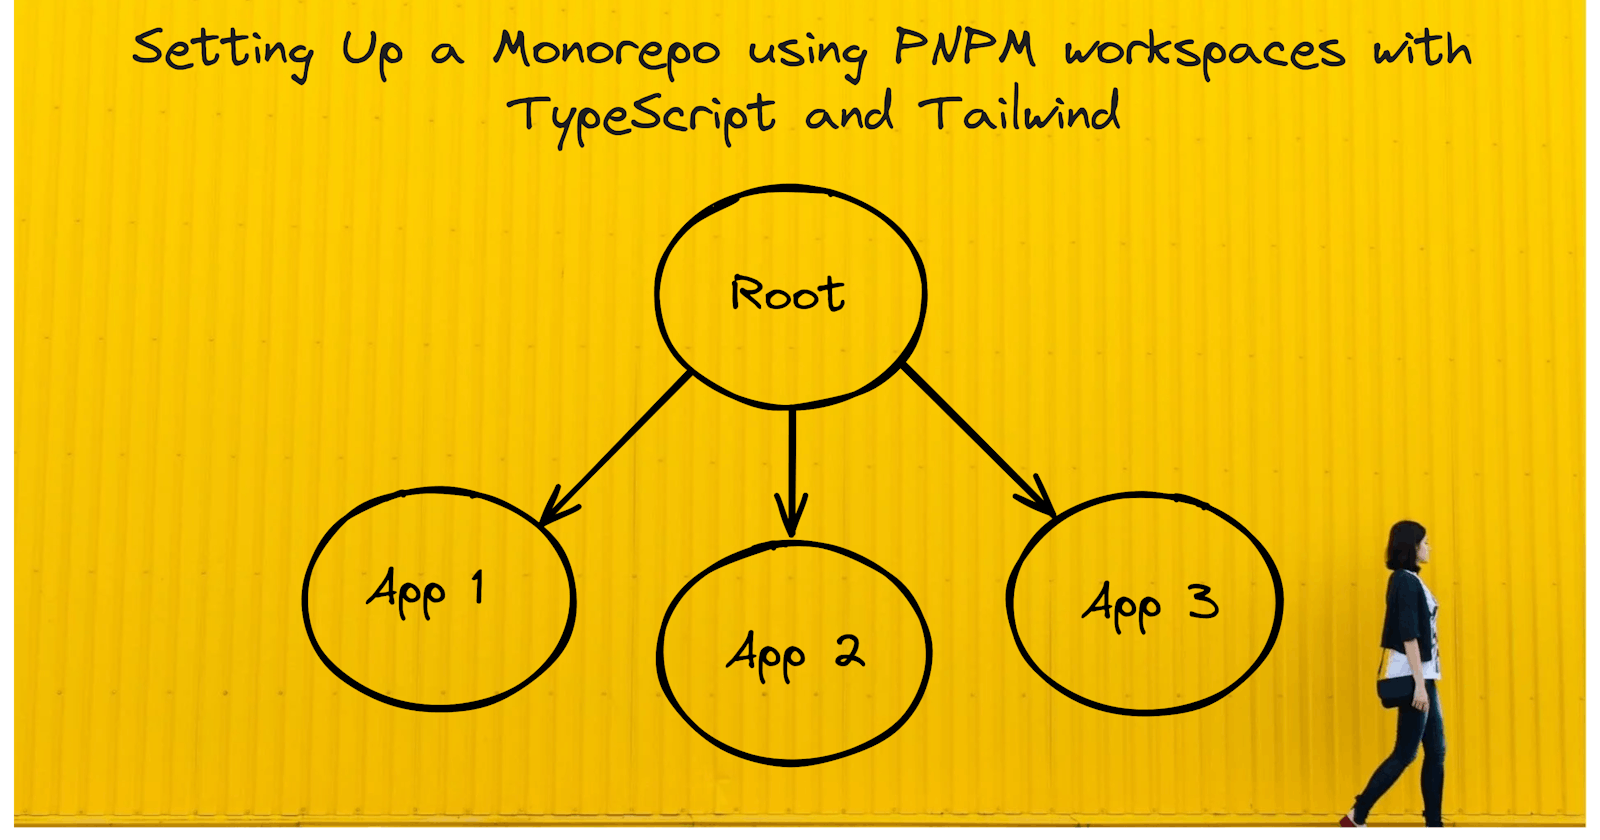 Cover Image for Setting up a Monorepo using PNPM workspaces with TypeScript and Tailwind